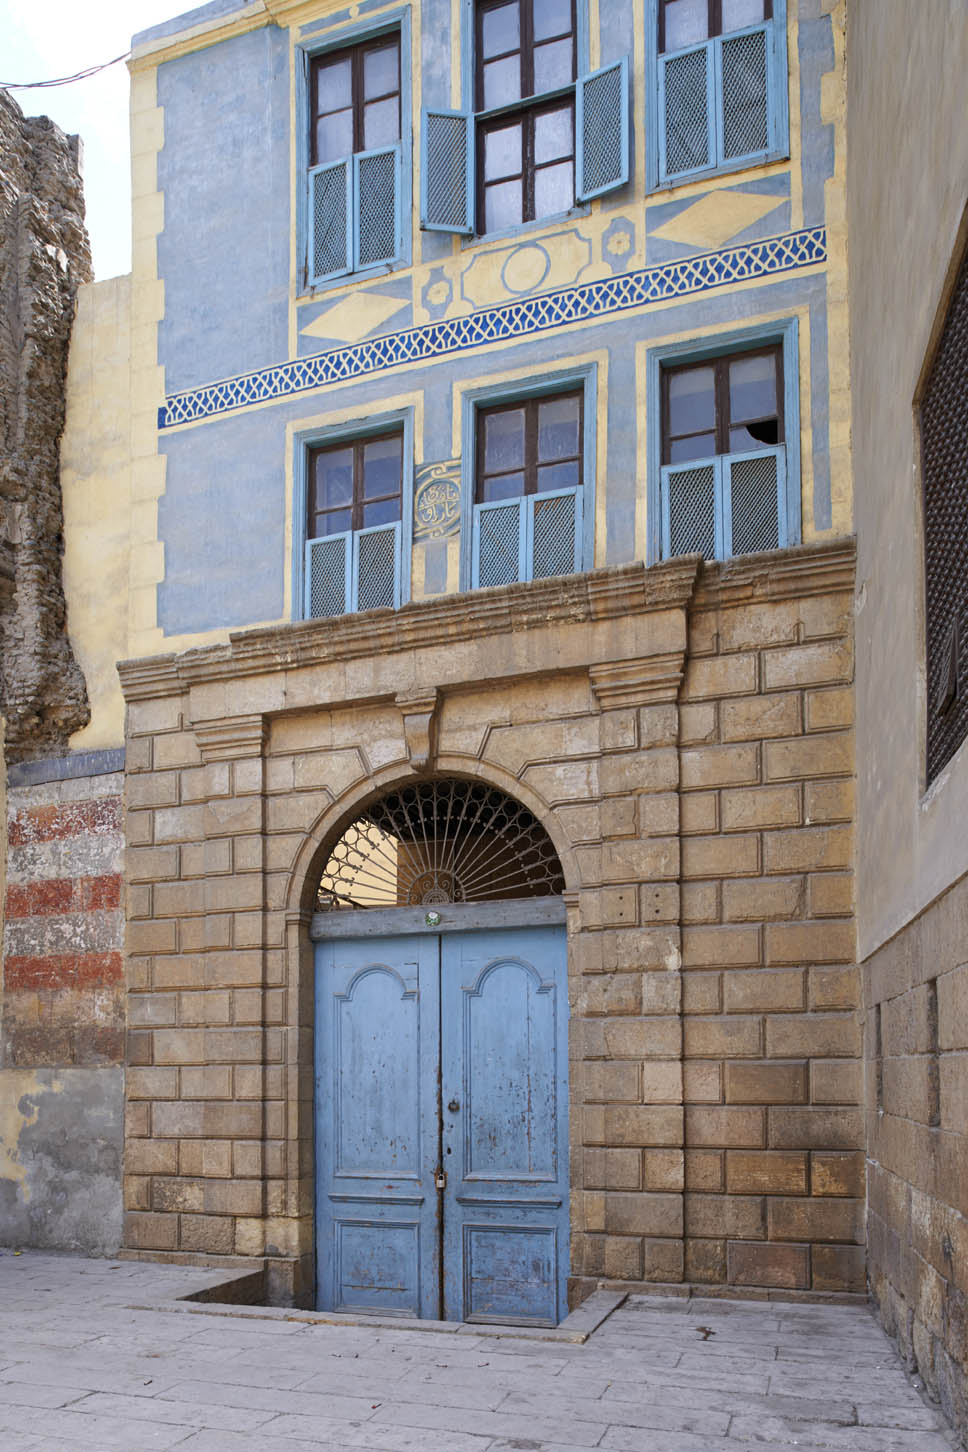 Exterior view of entrance (a nineteenth century reconstruction)